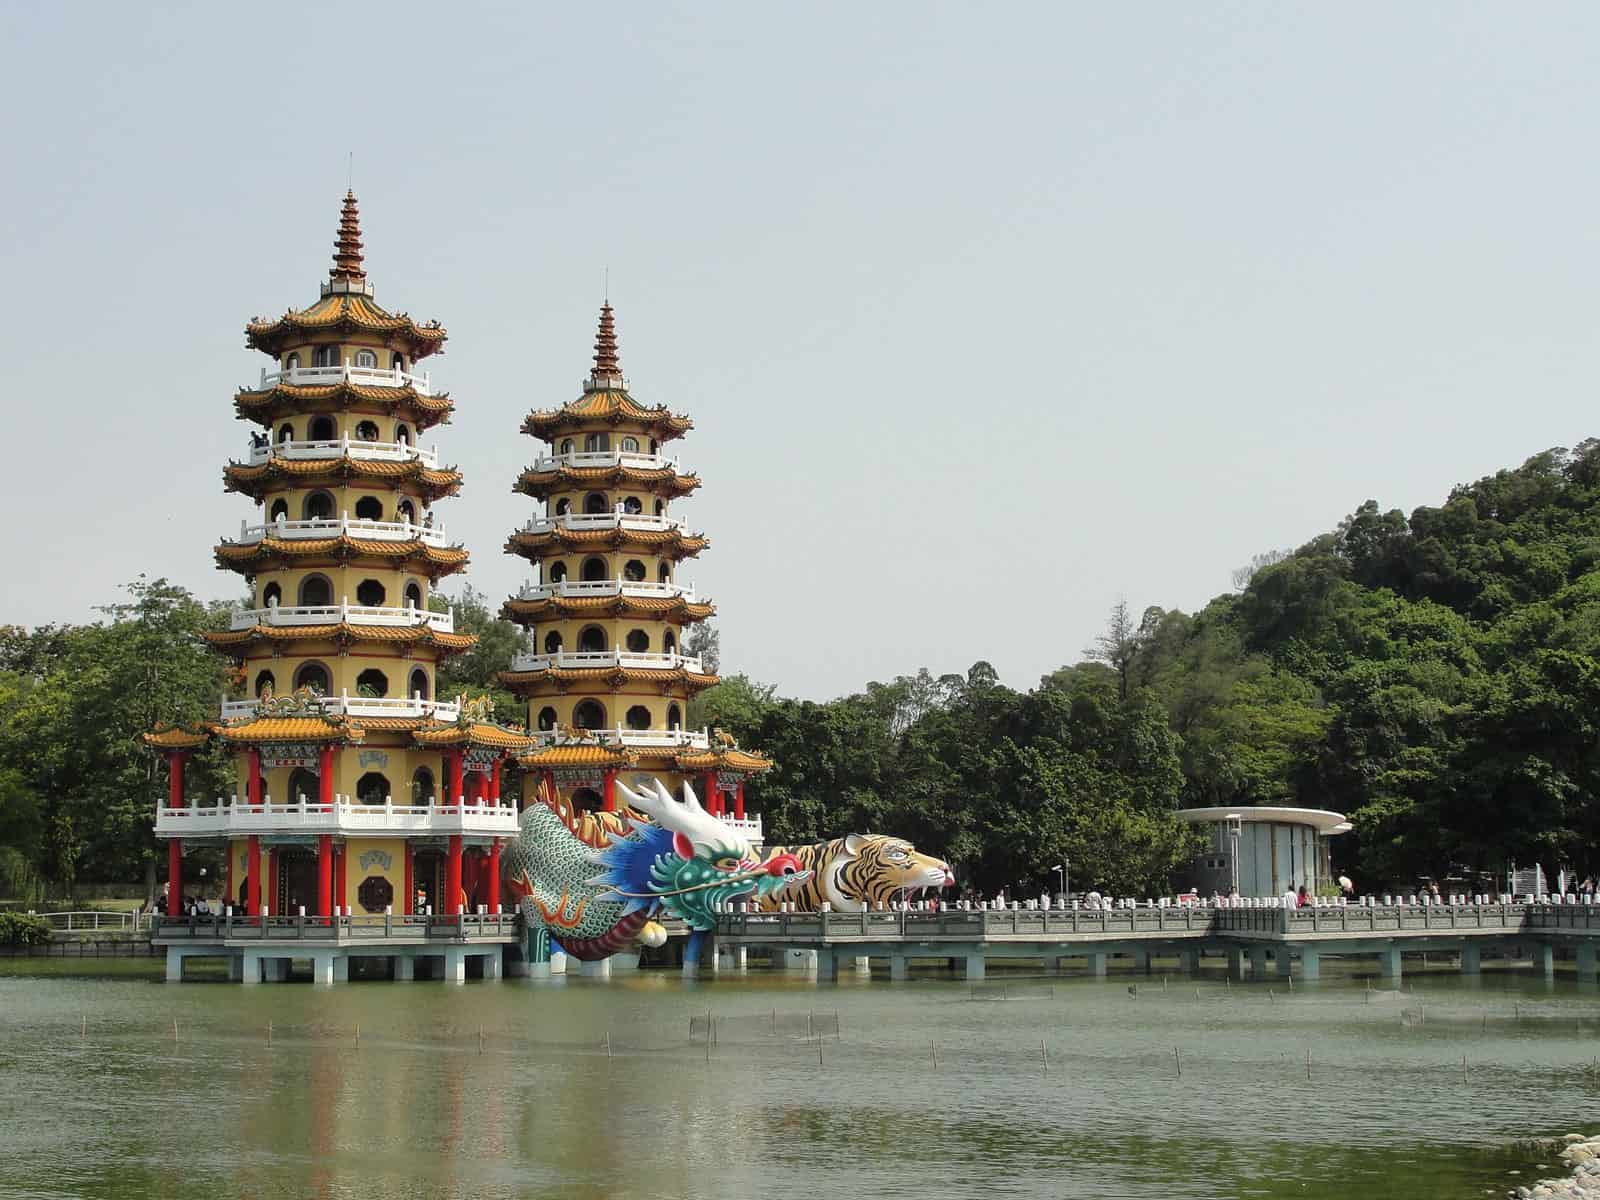 Lotus Pond in Kaohsiung